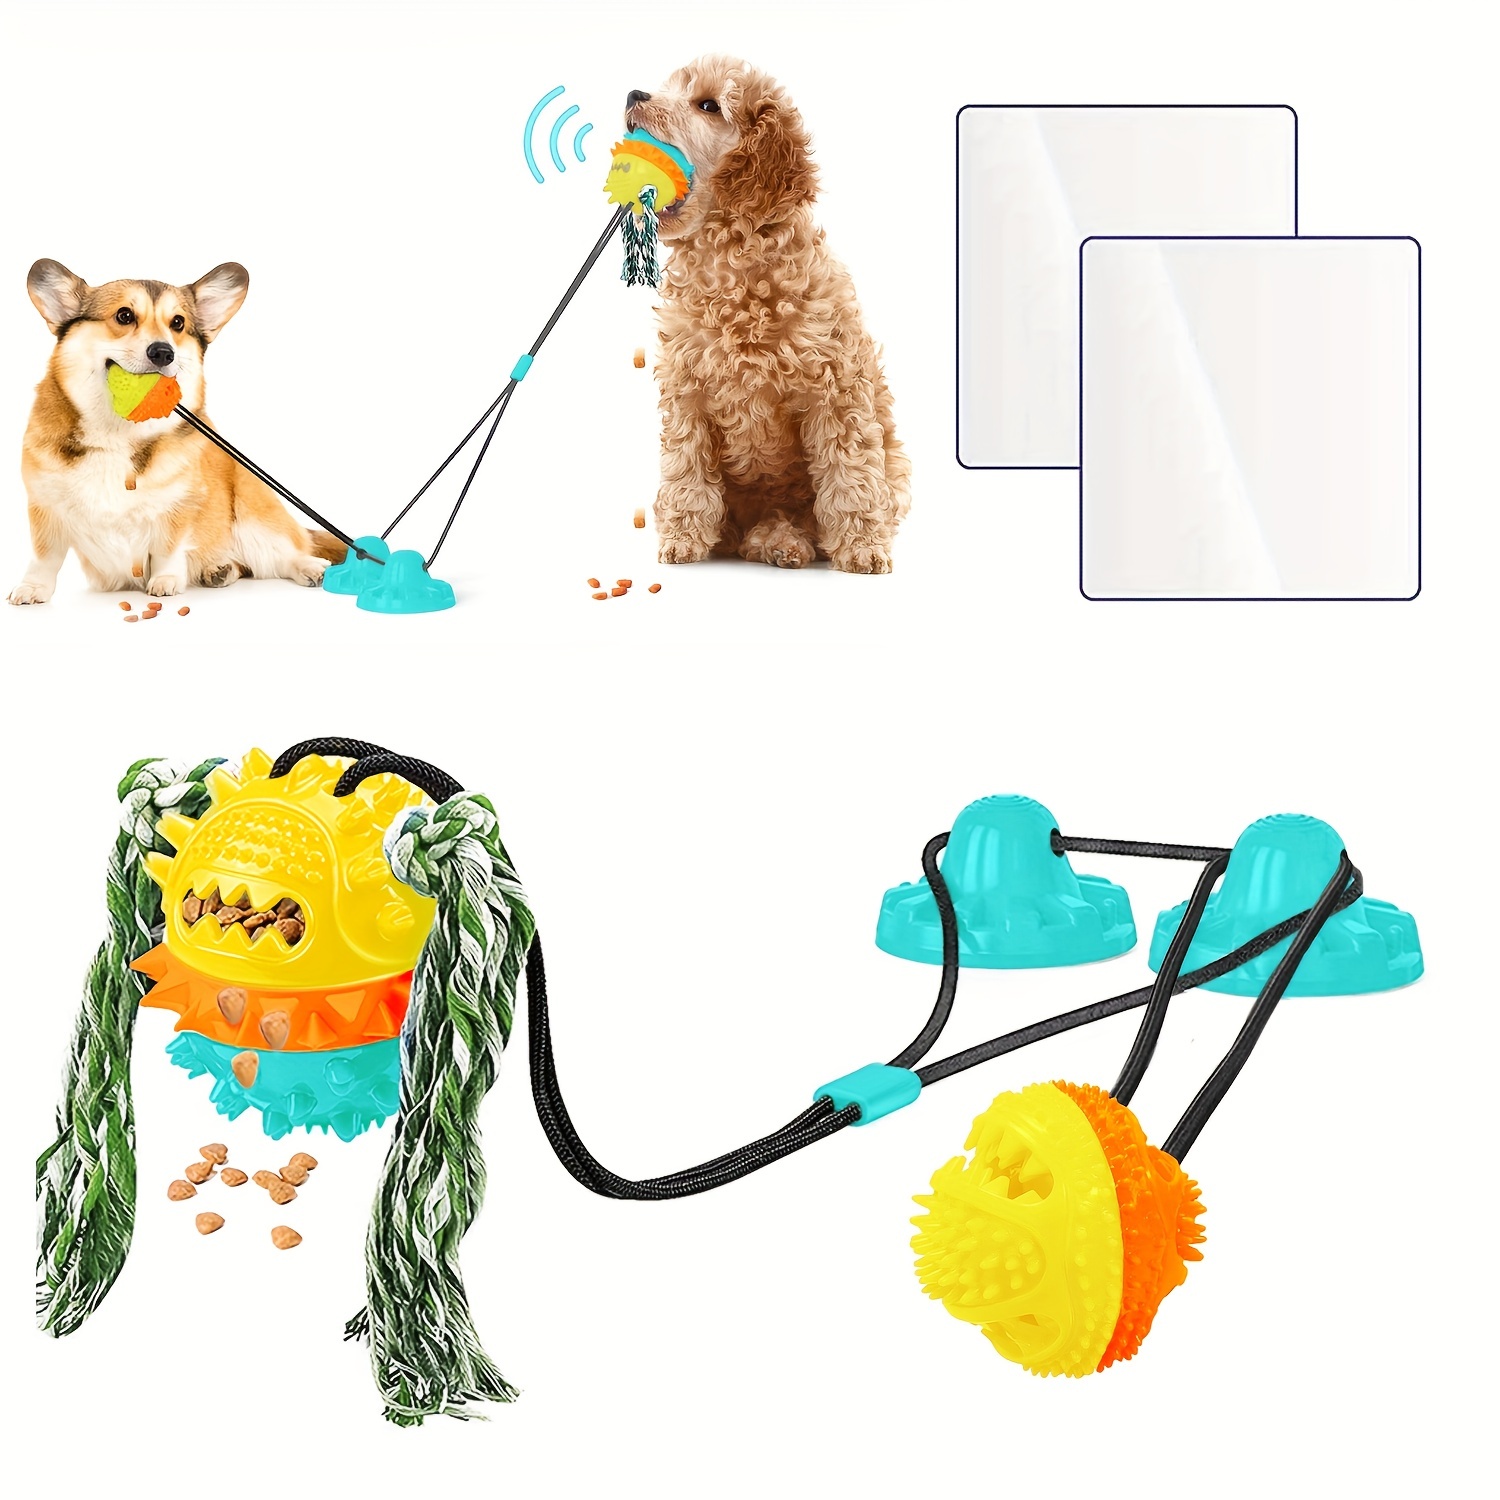 Dog Toy With Suction Cup Dog Toy Dog Toy Rubber Ball